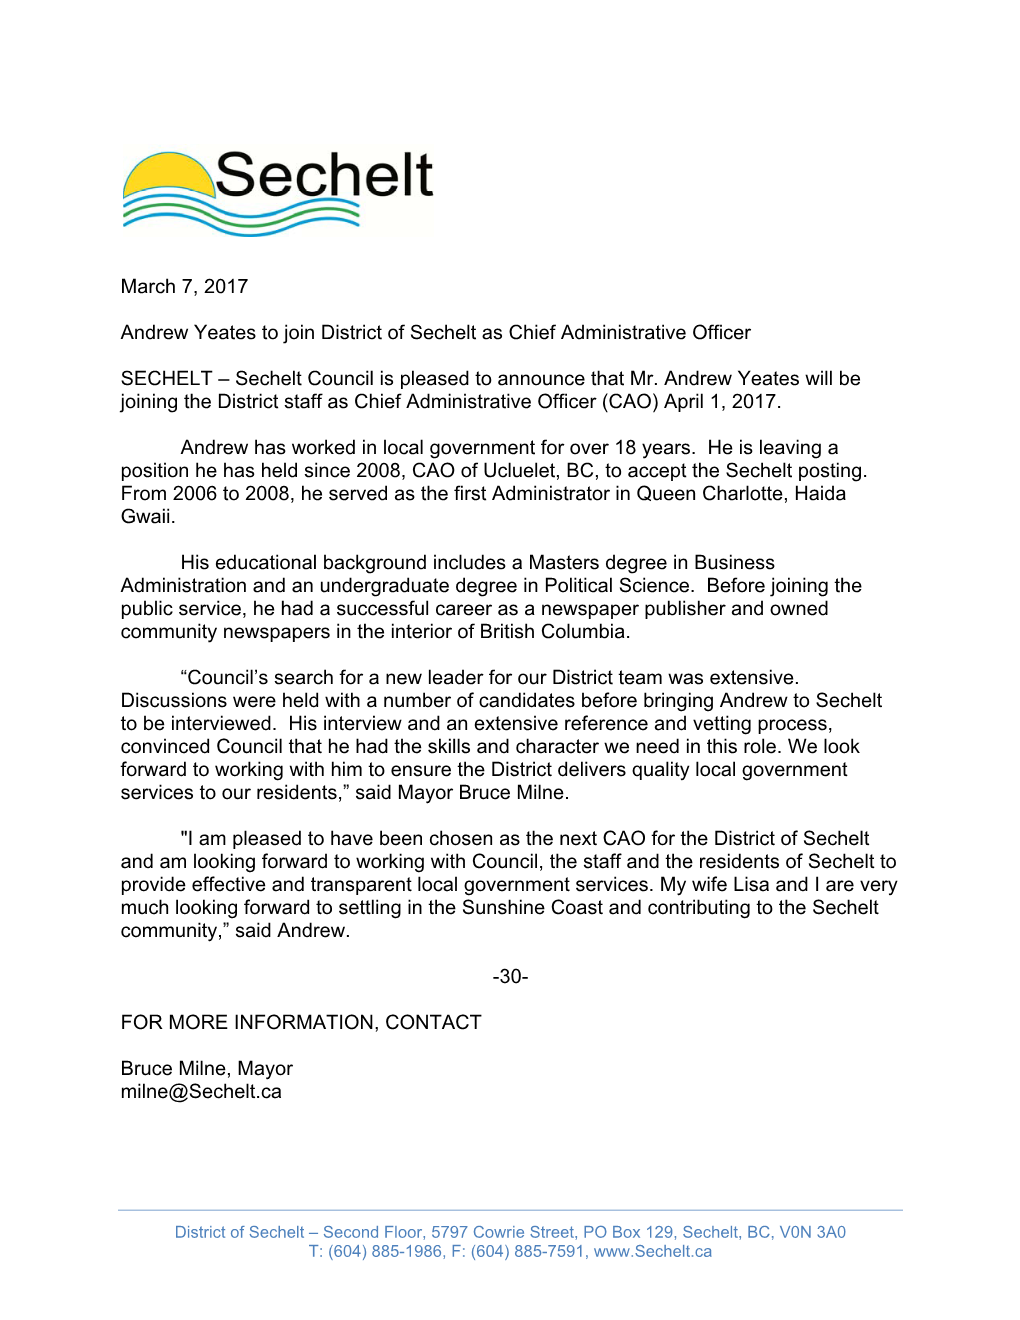 March 7, 2017 Andrew Yeates to Join District of Sechelt As Chief